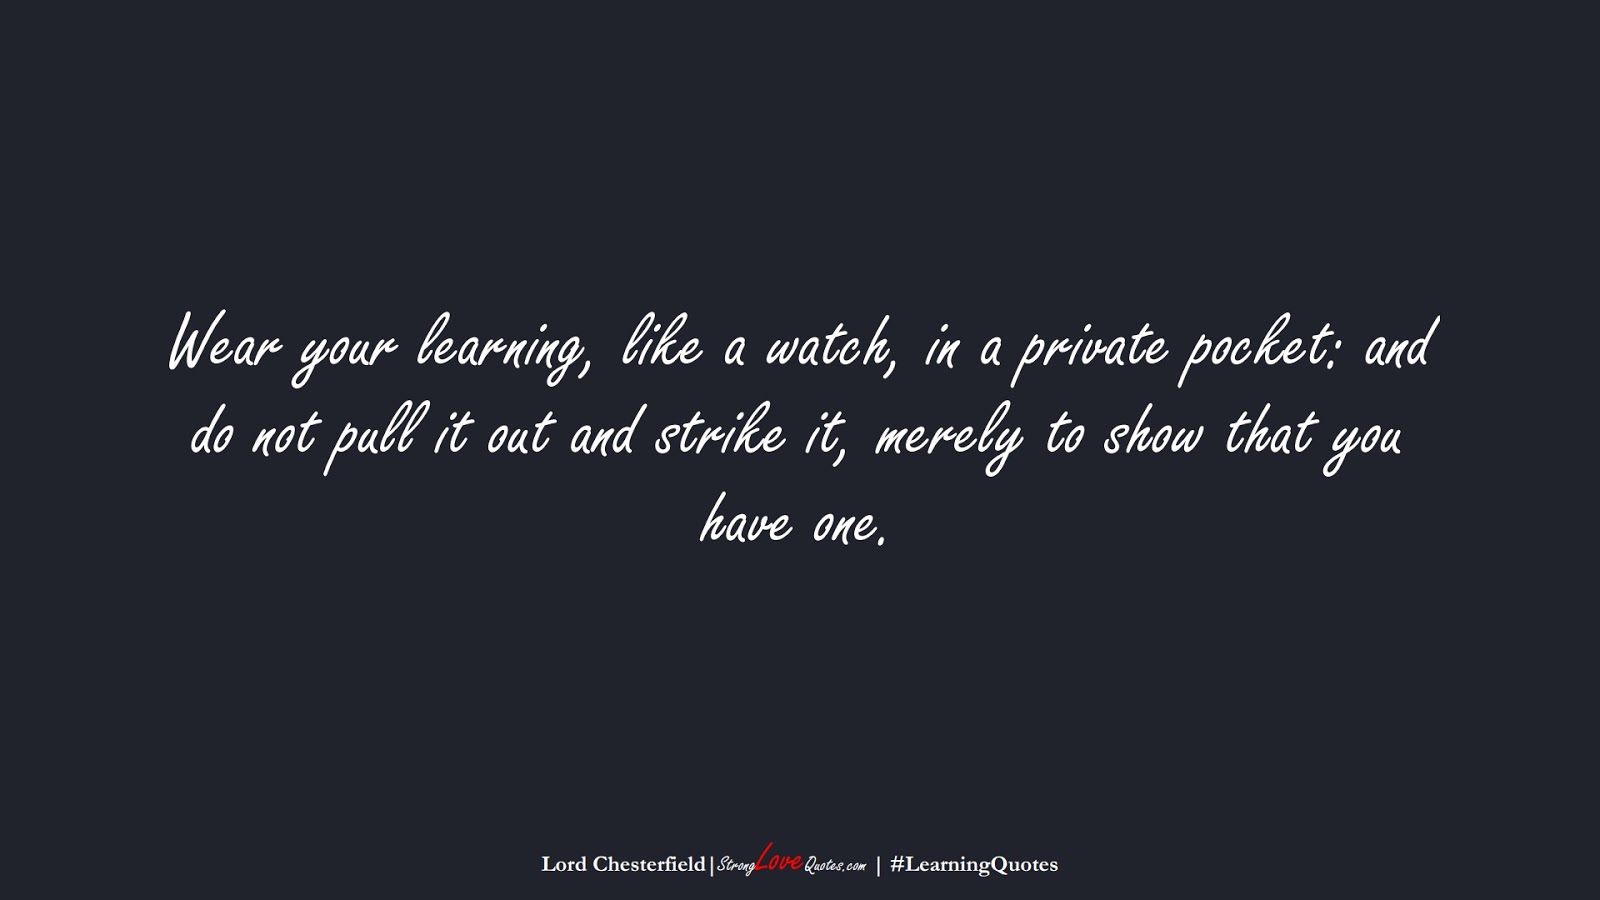 Wear your learning, like a watch, in a private pocket: and do not pull it out and strike it, merely to show that you have one. (Lord Chesterfield);  #LearningQuotes